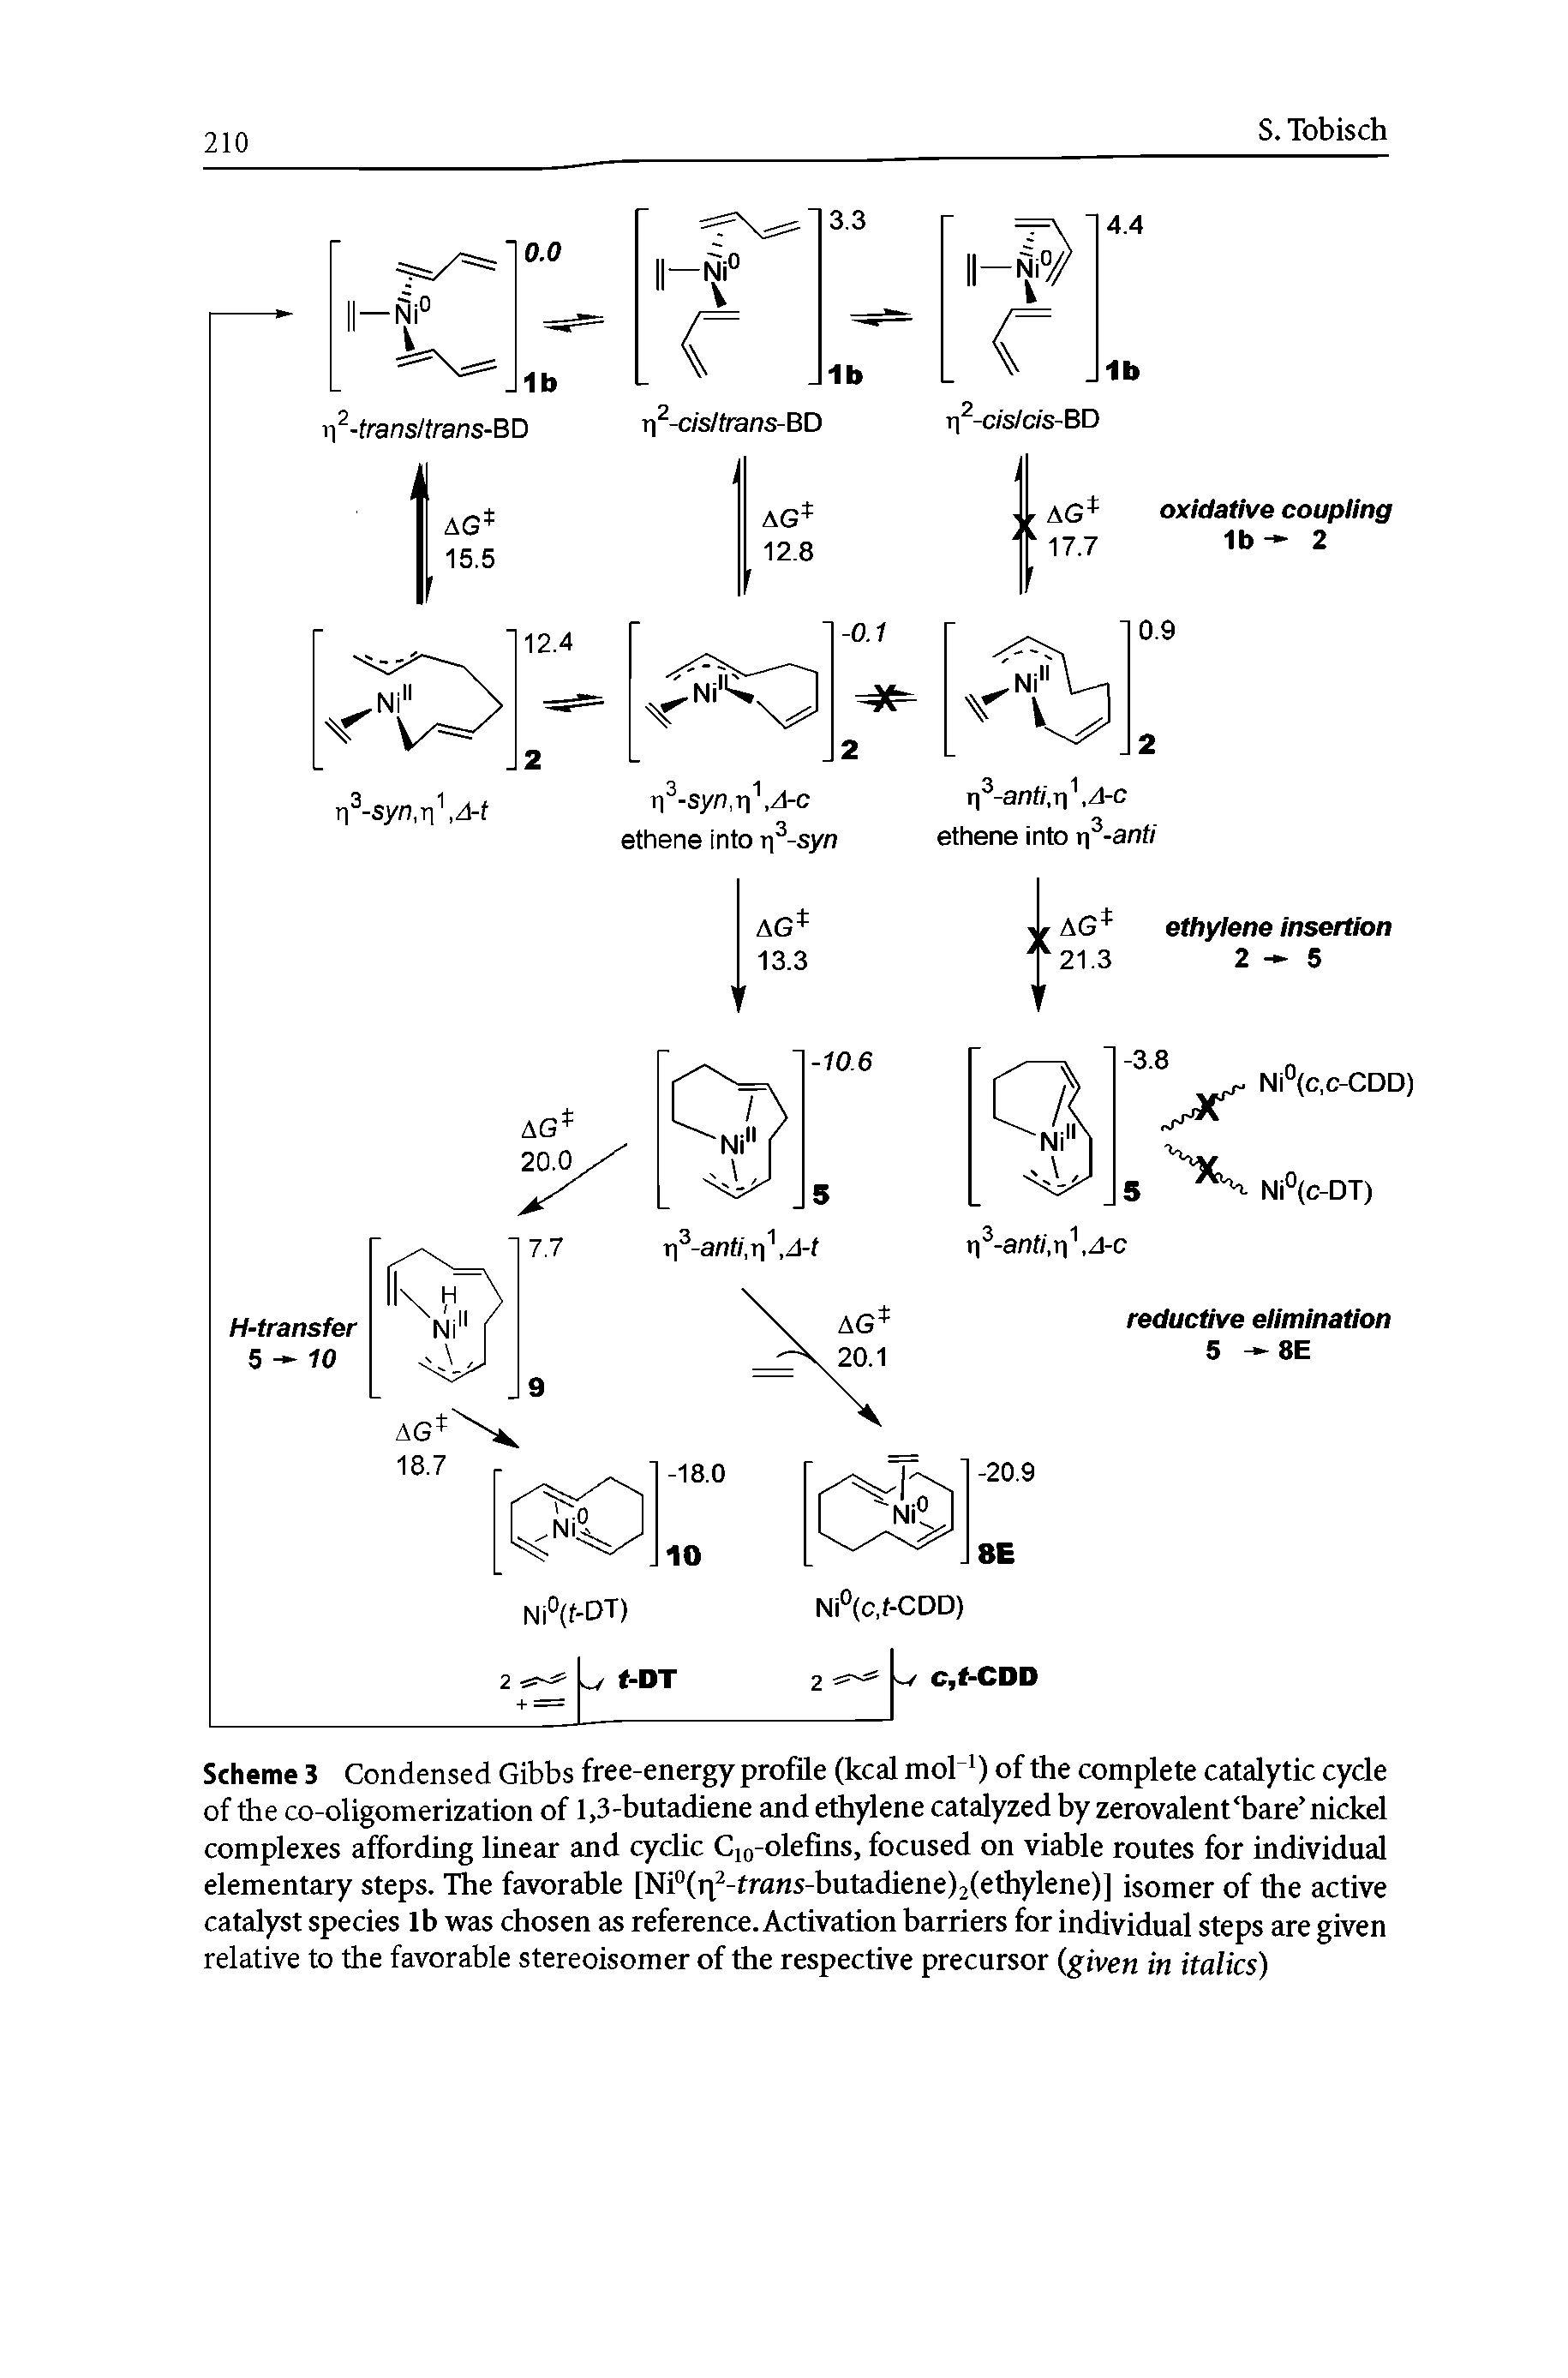 Scheme 3 Condensed Gibbs free-energy profile (kcal mol ) of the complete catalytic cycle of the co-oligomerization of 1,3-butadiene and ethylene catalyzed by zerovalent bare nickel complexes affording linear and cyclic Cio-olefins, focused on viable routes for individual elementary steps. The favorable [Ni (ri -frans-butadiene)2(ethylene)] isomer of the active catalyst species lb was chosen as reference. Activation barriers for individual steps are given relative to the favorable stereoisomer of the respective precursor (given in italics)...